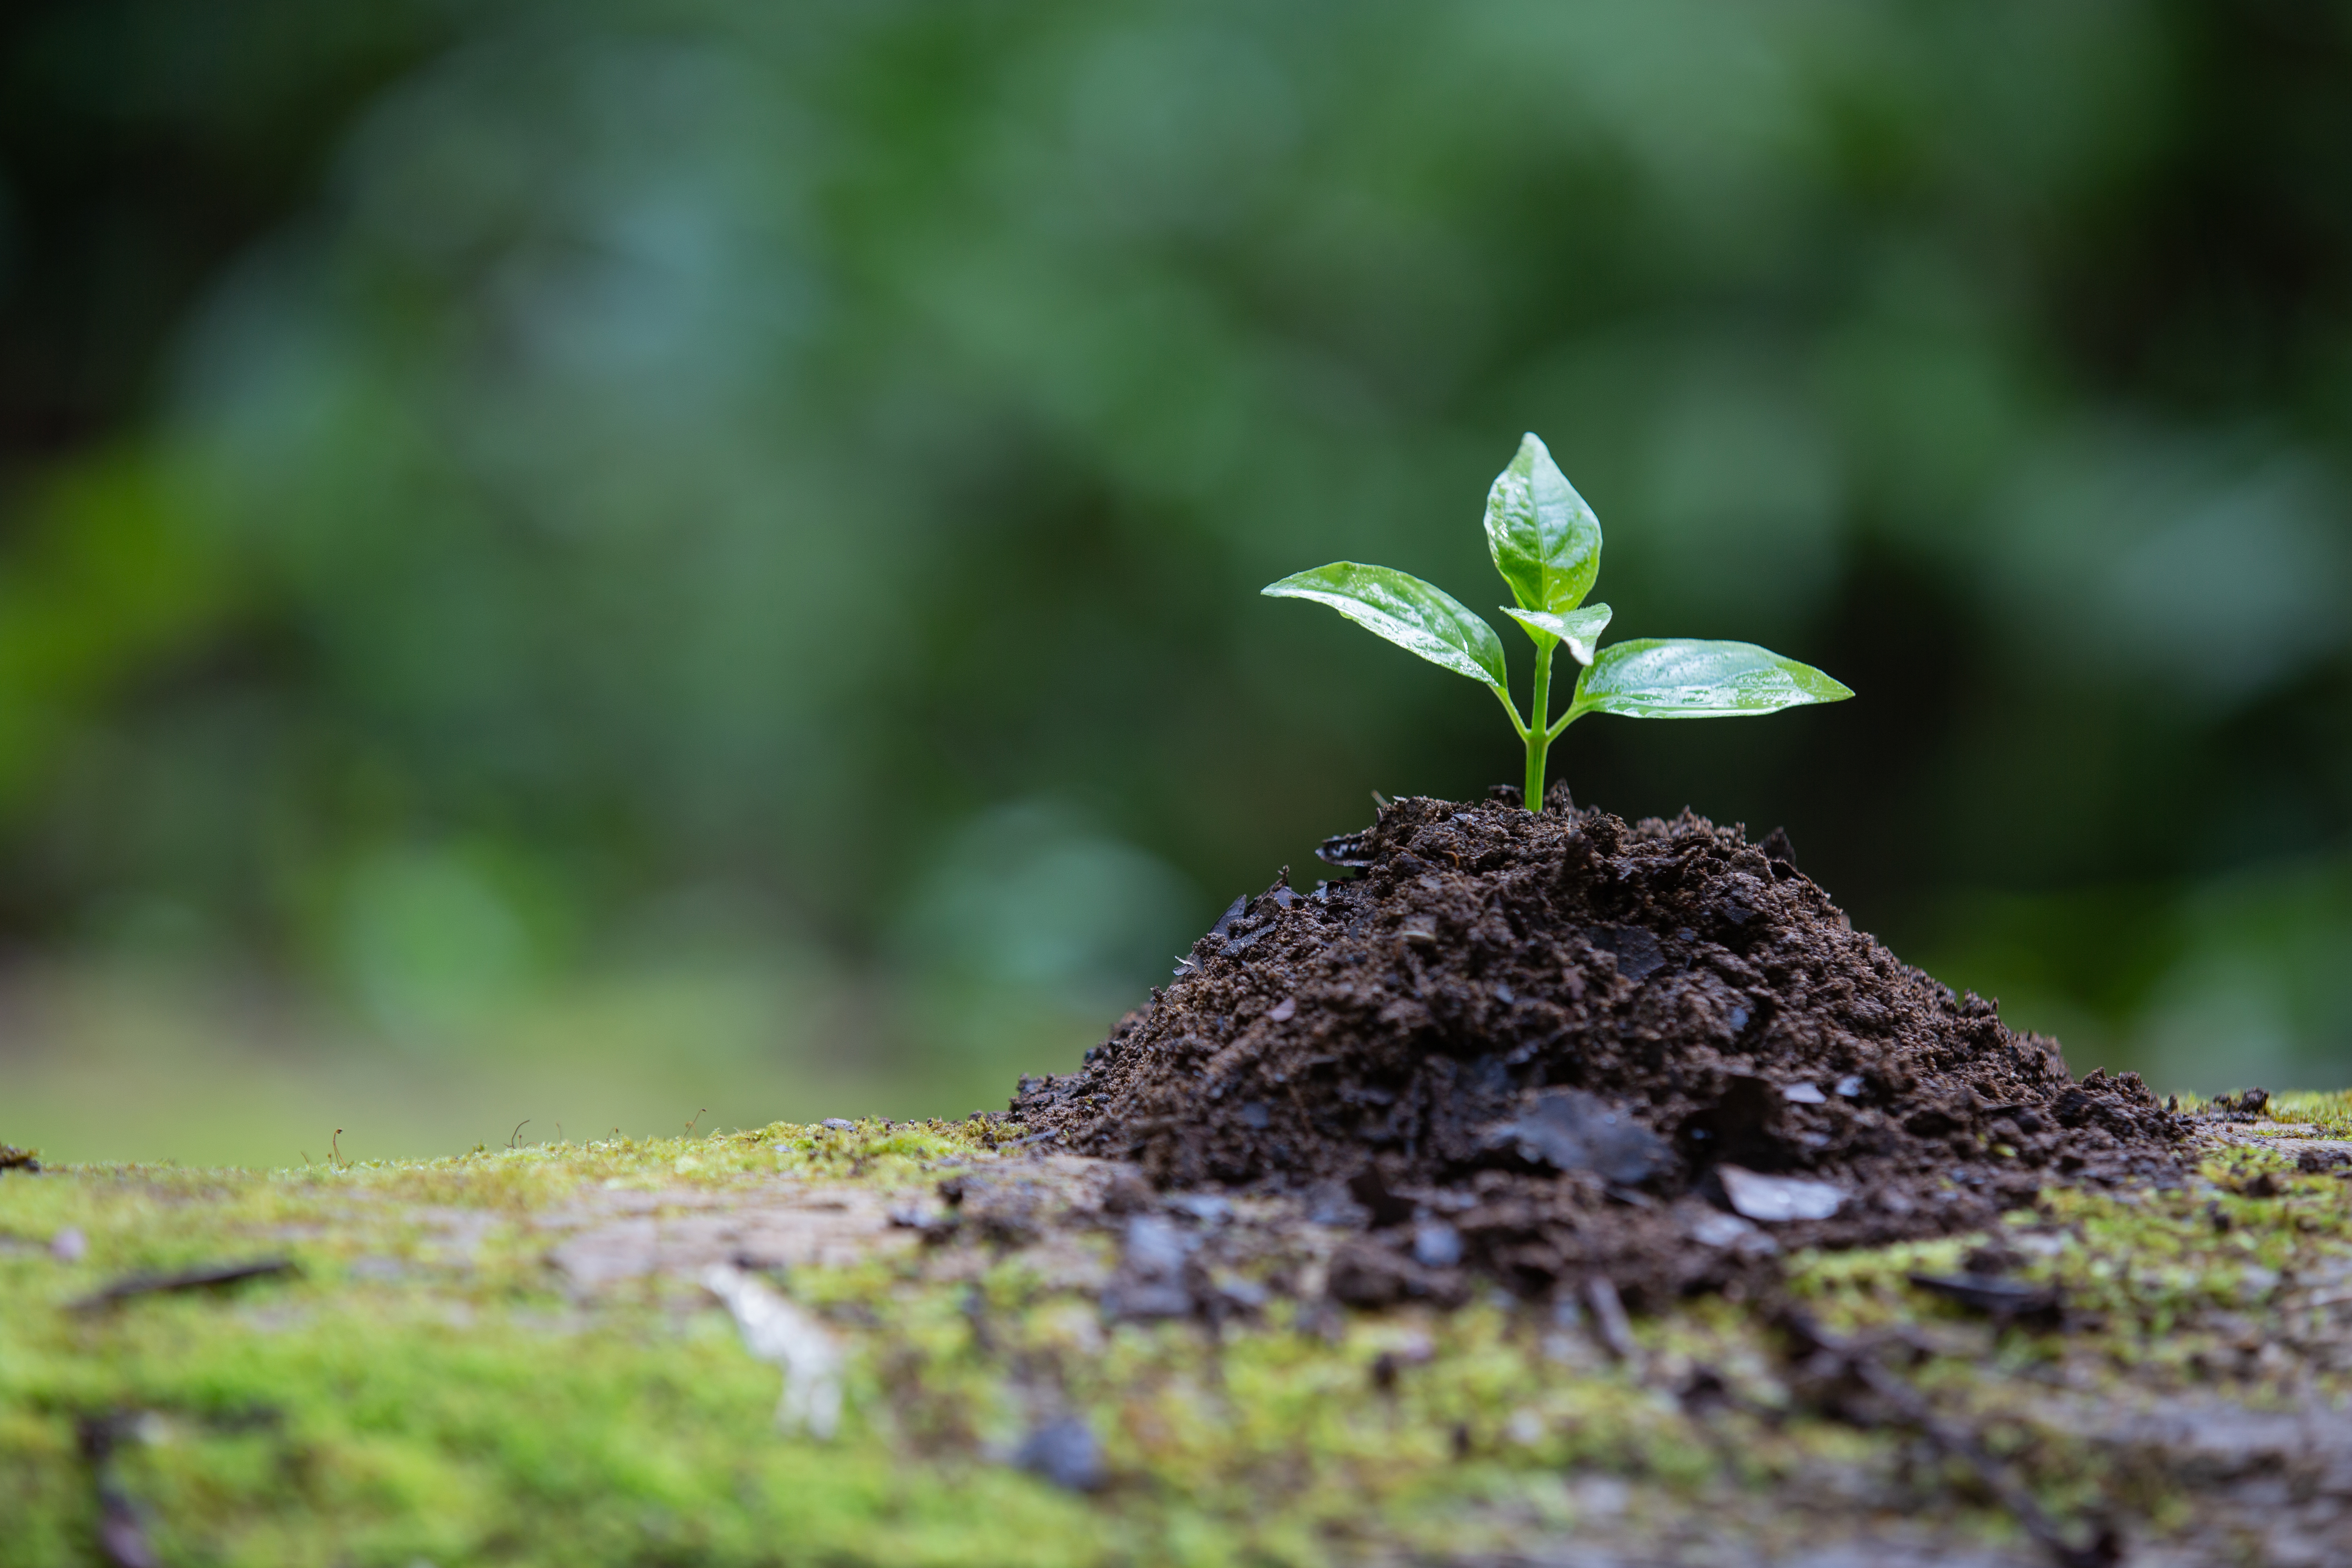 A little plant on a pile of soil with a blurred environmental background